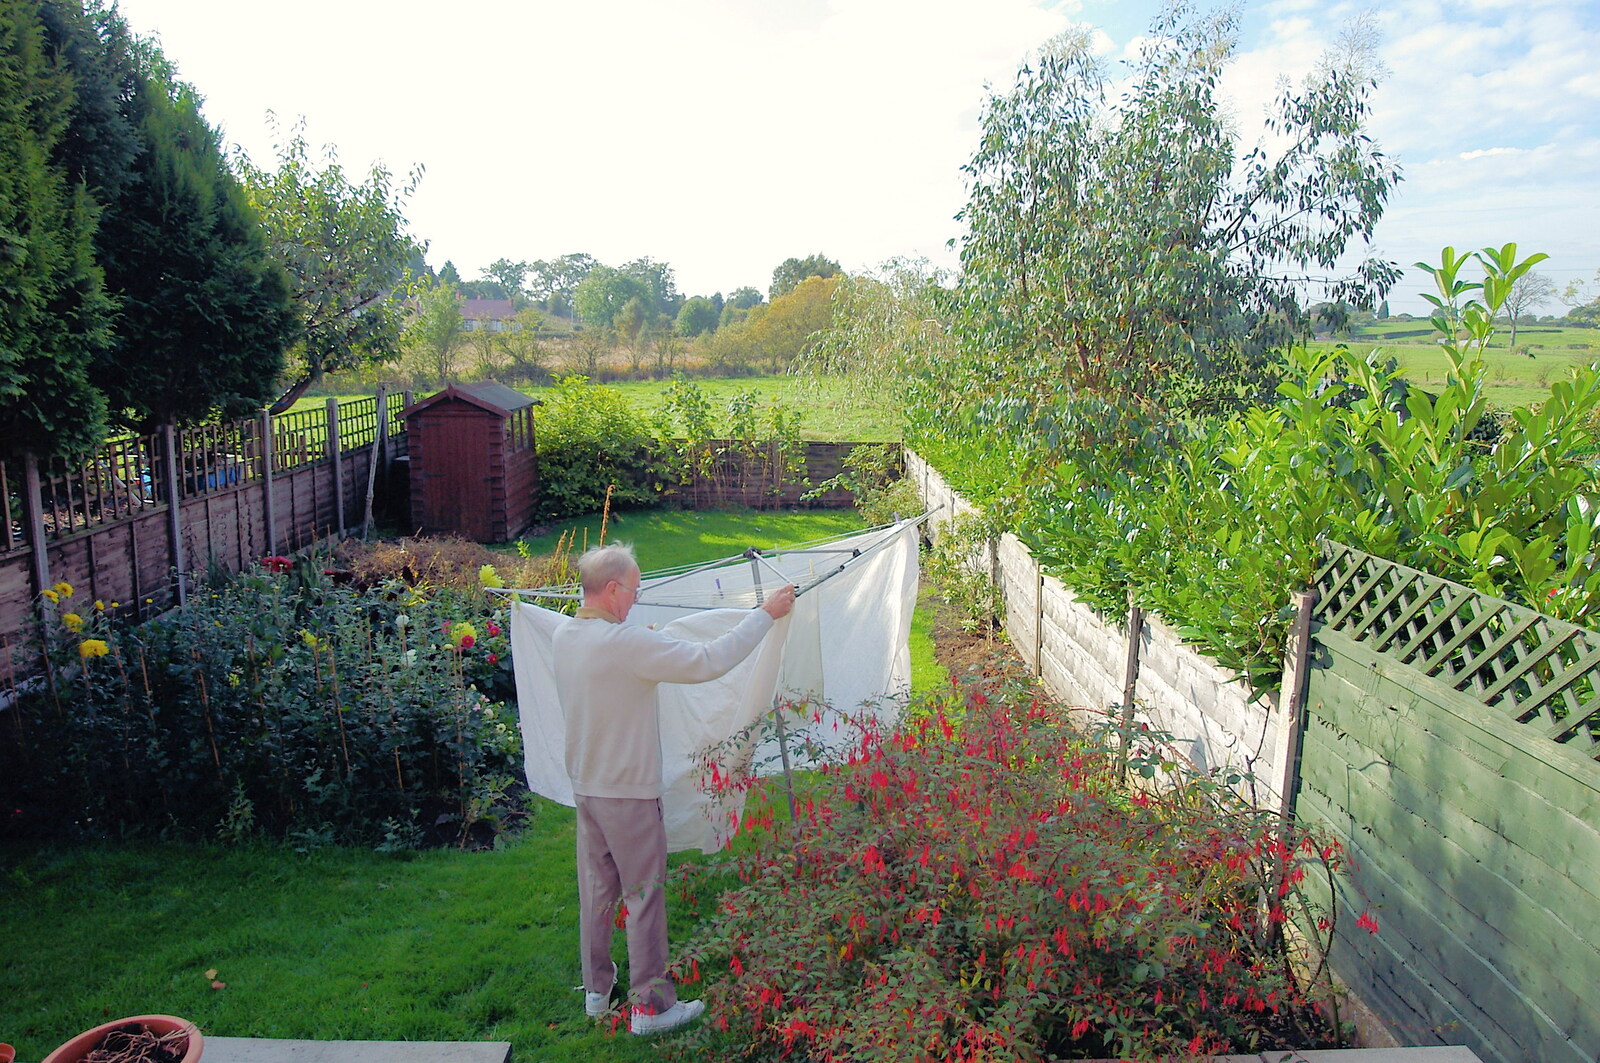 The Old Man hangs his washing out from A Trip Around Macclesfield and Sandbach, Cheshire - 10th September 2005